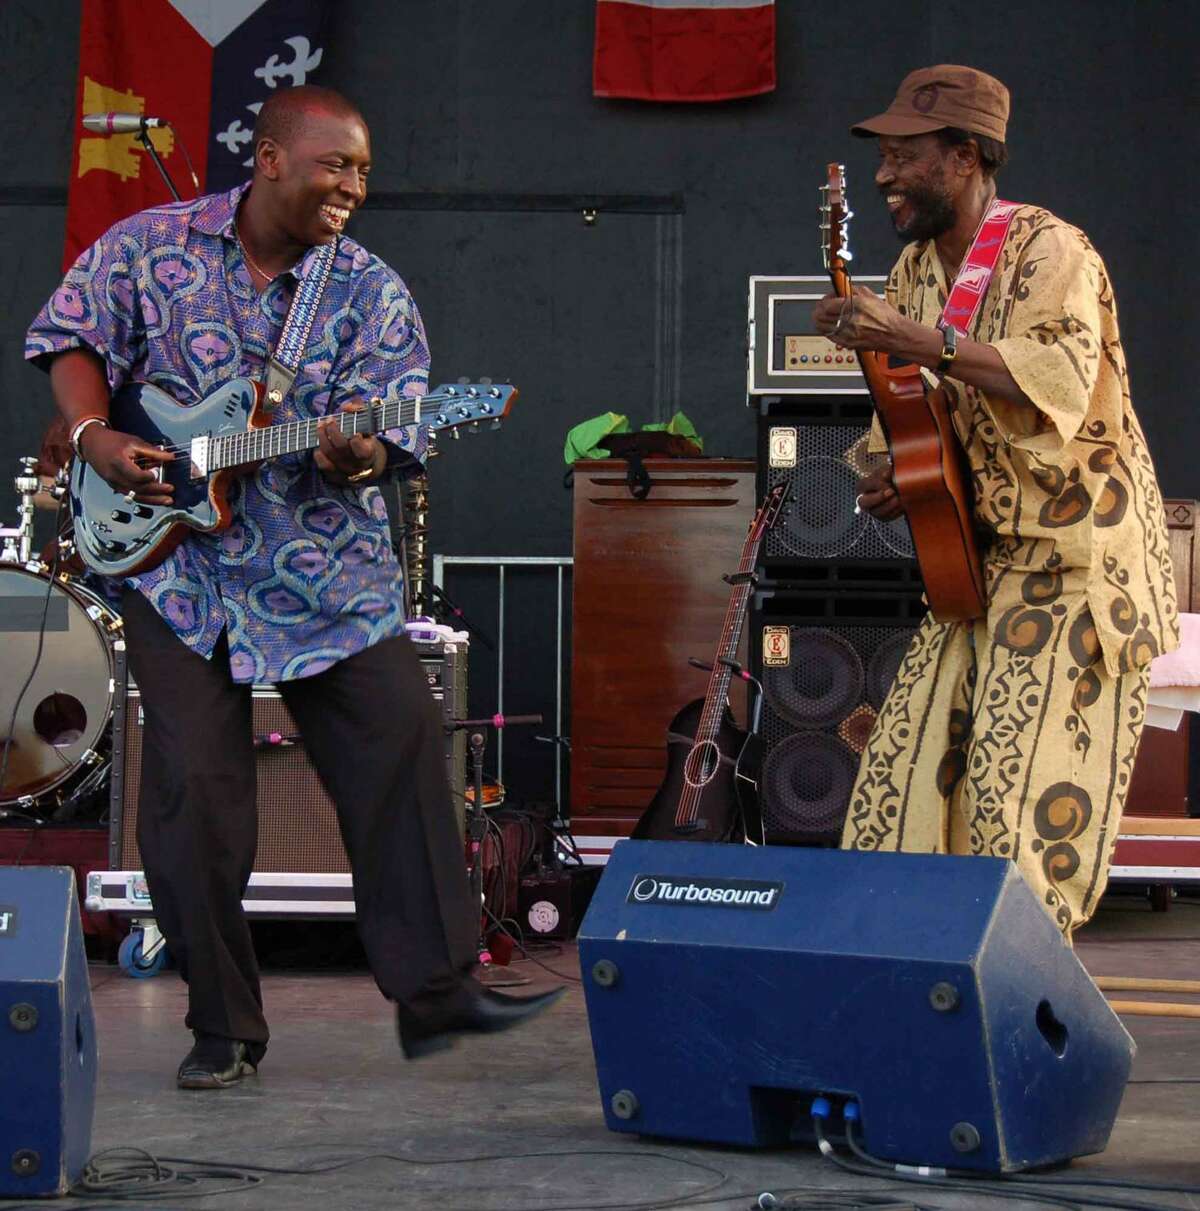 Vieux Farka Toure with band mate Mama Sissoko at Fete de Marquette